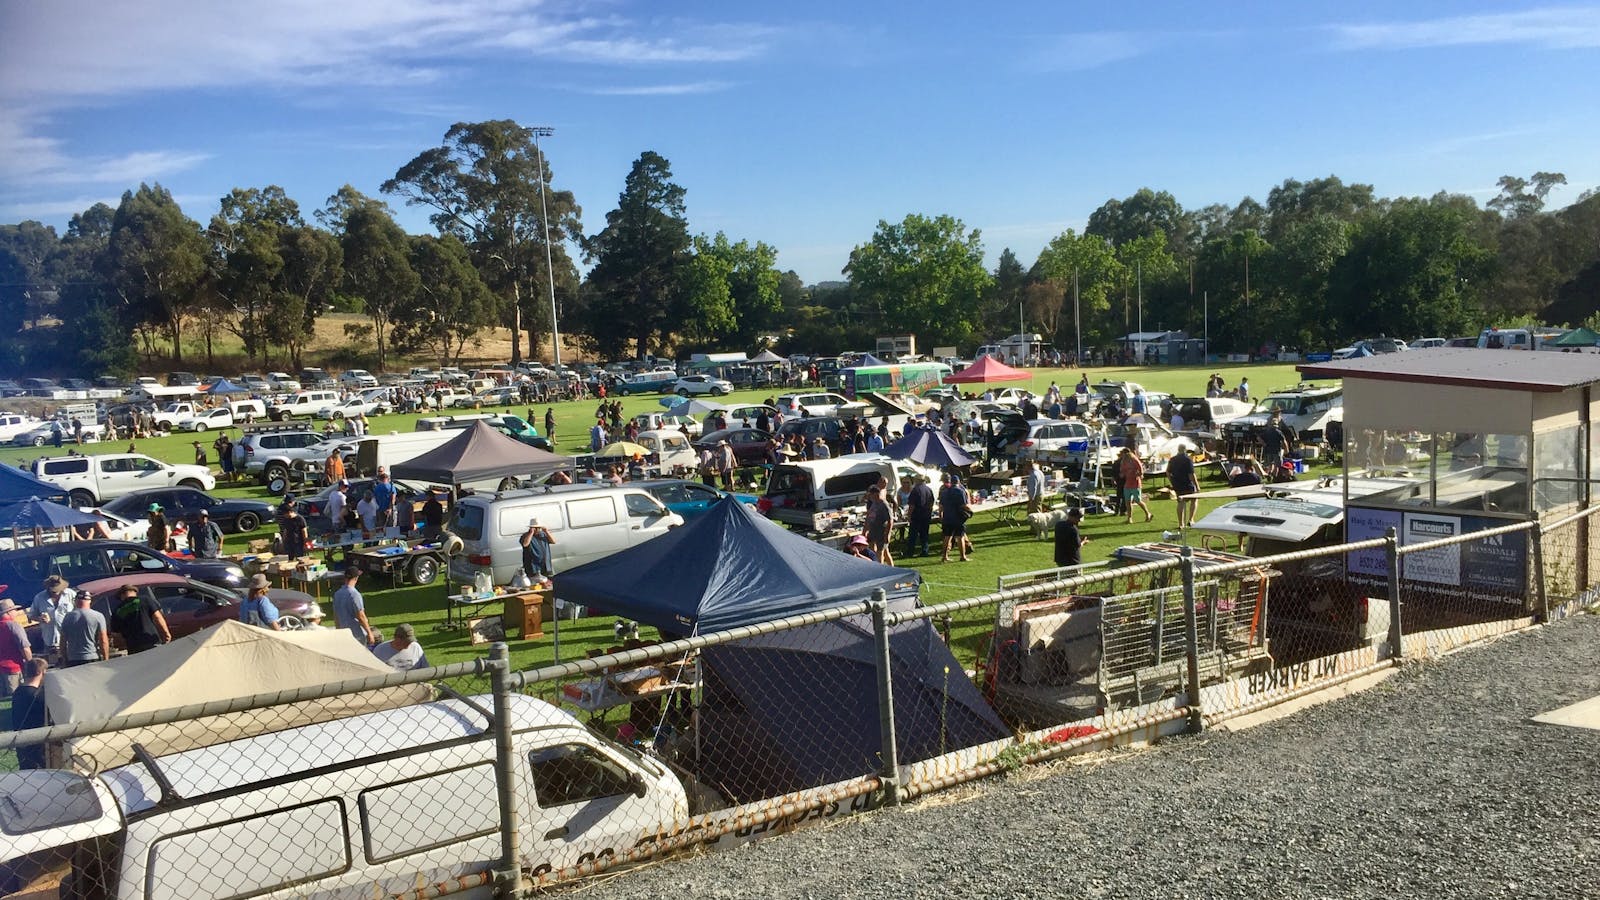 Image for Hahndorf and Districts Lions Club Inc Swap Meet